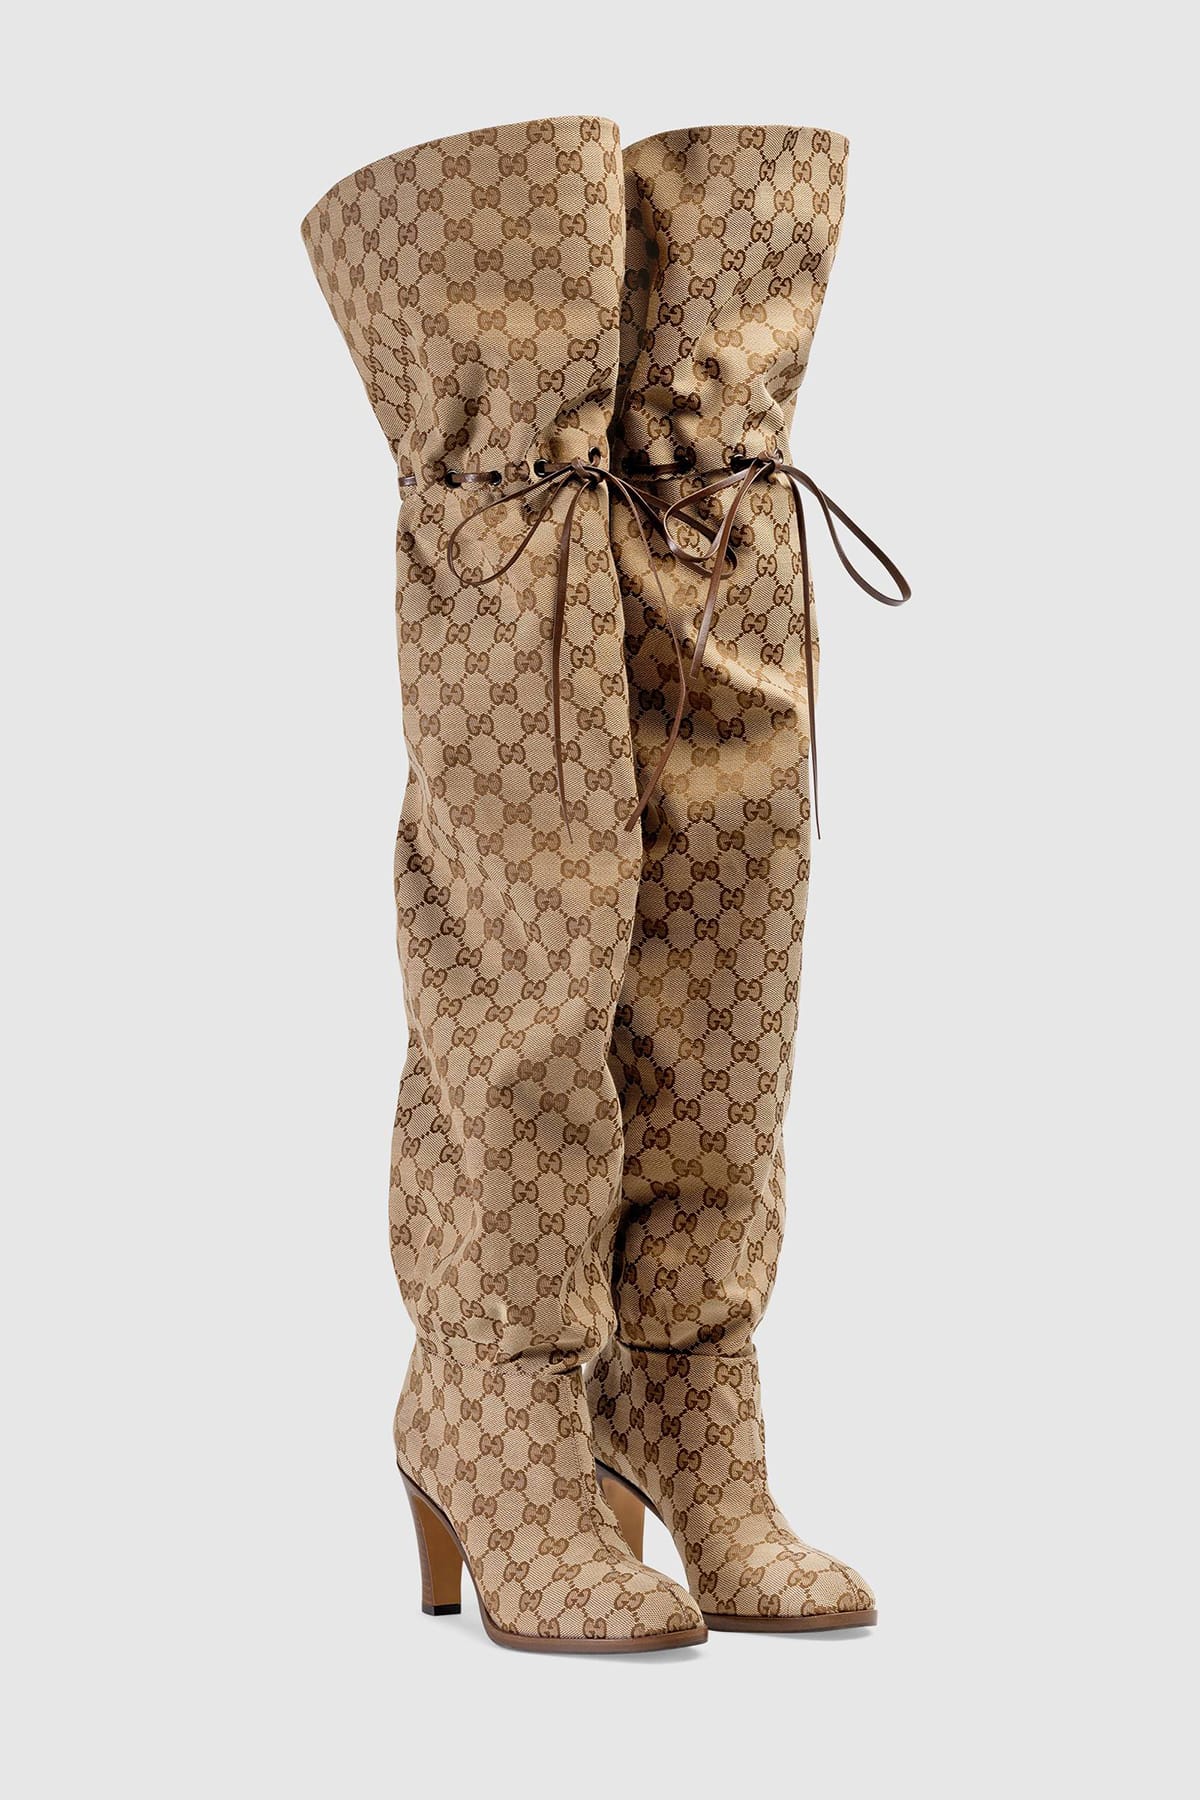 gucci thigh high boots outfit